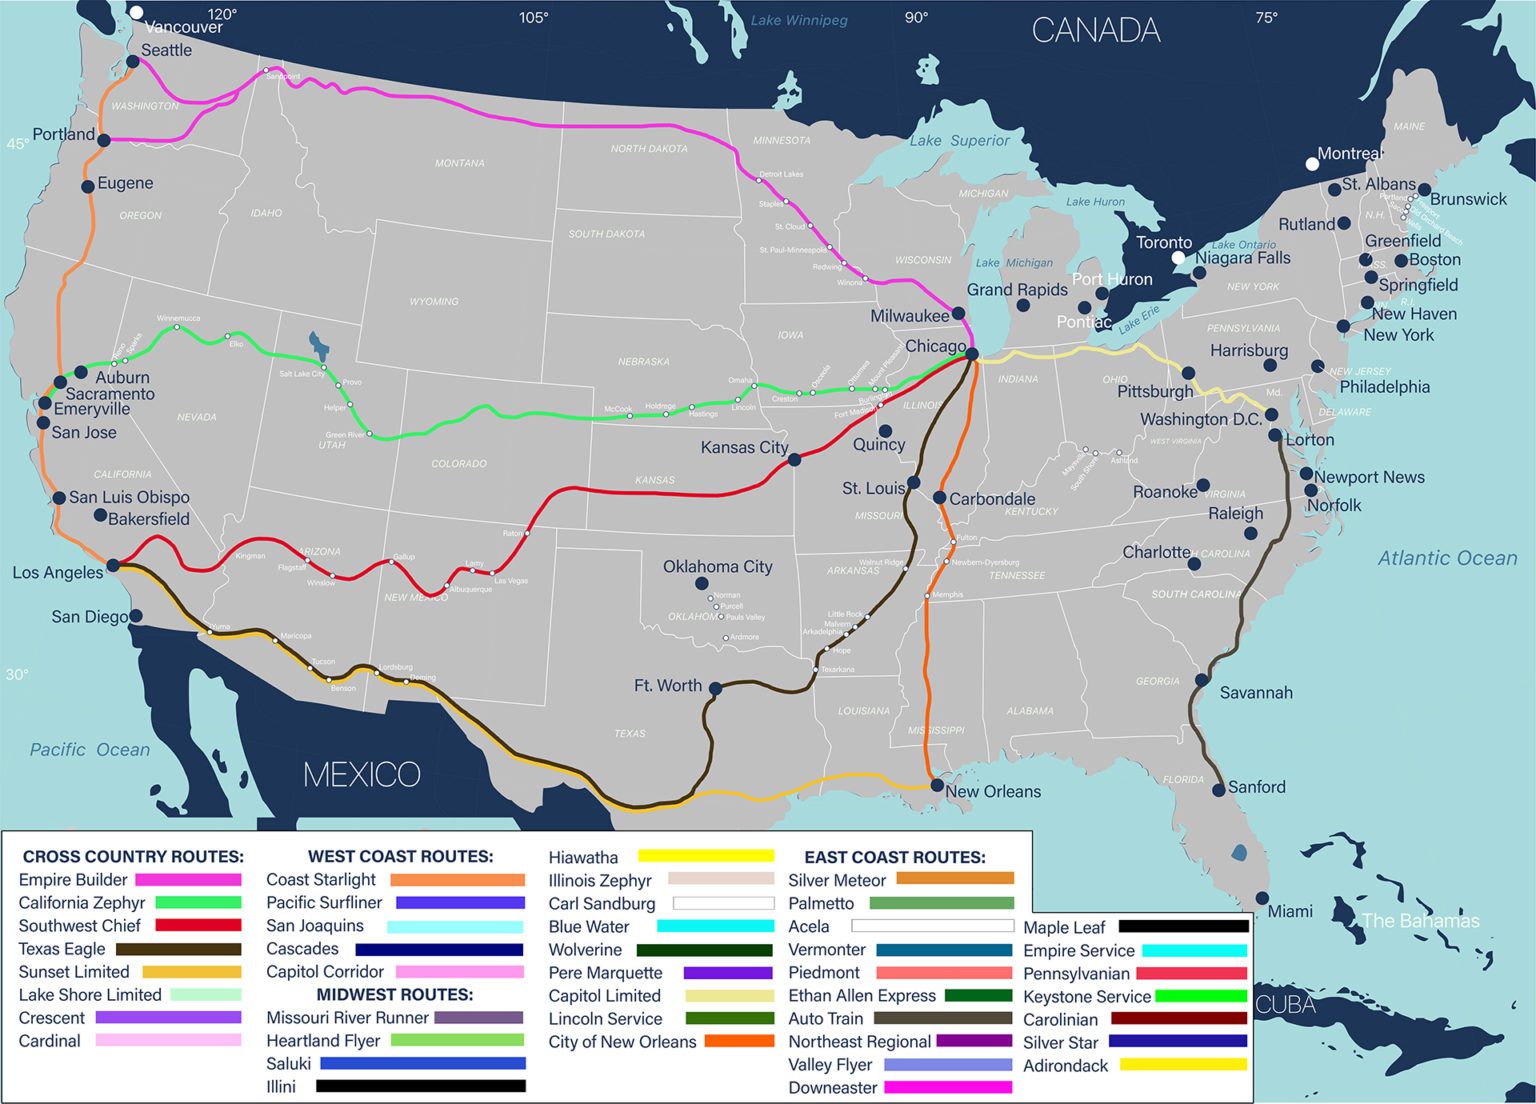 amtrak-superliner-sleeper-car-route-map-and-review-grounded-life-travel